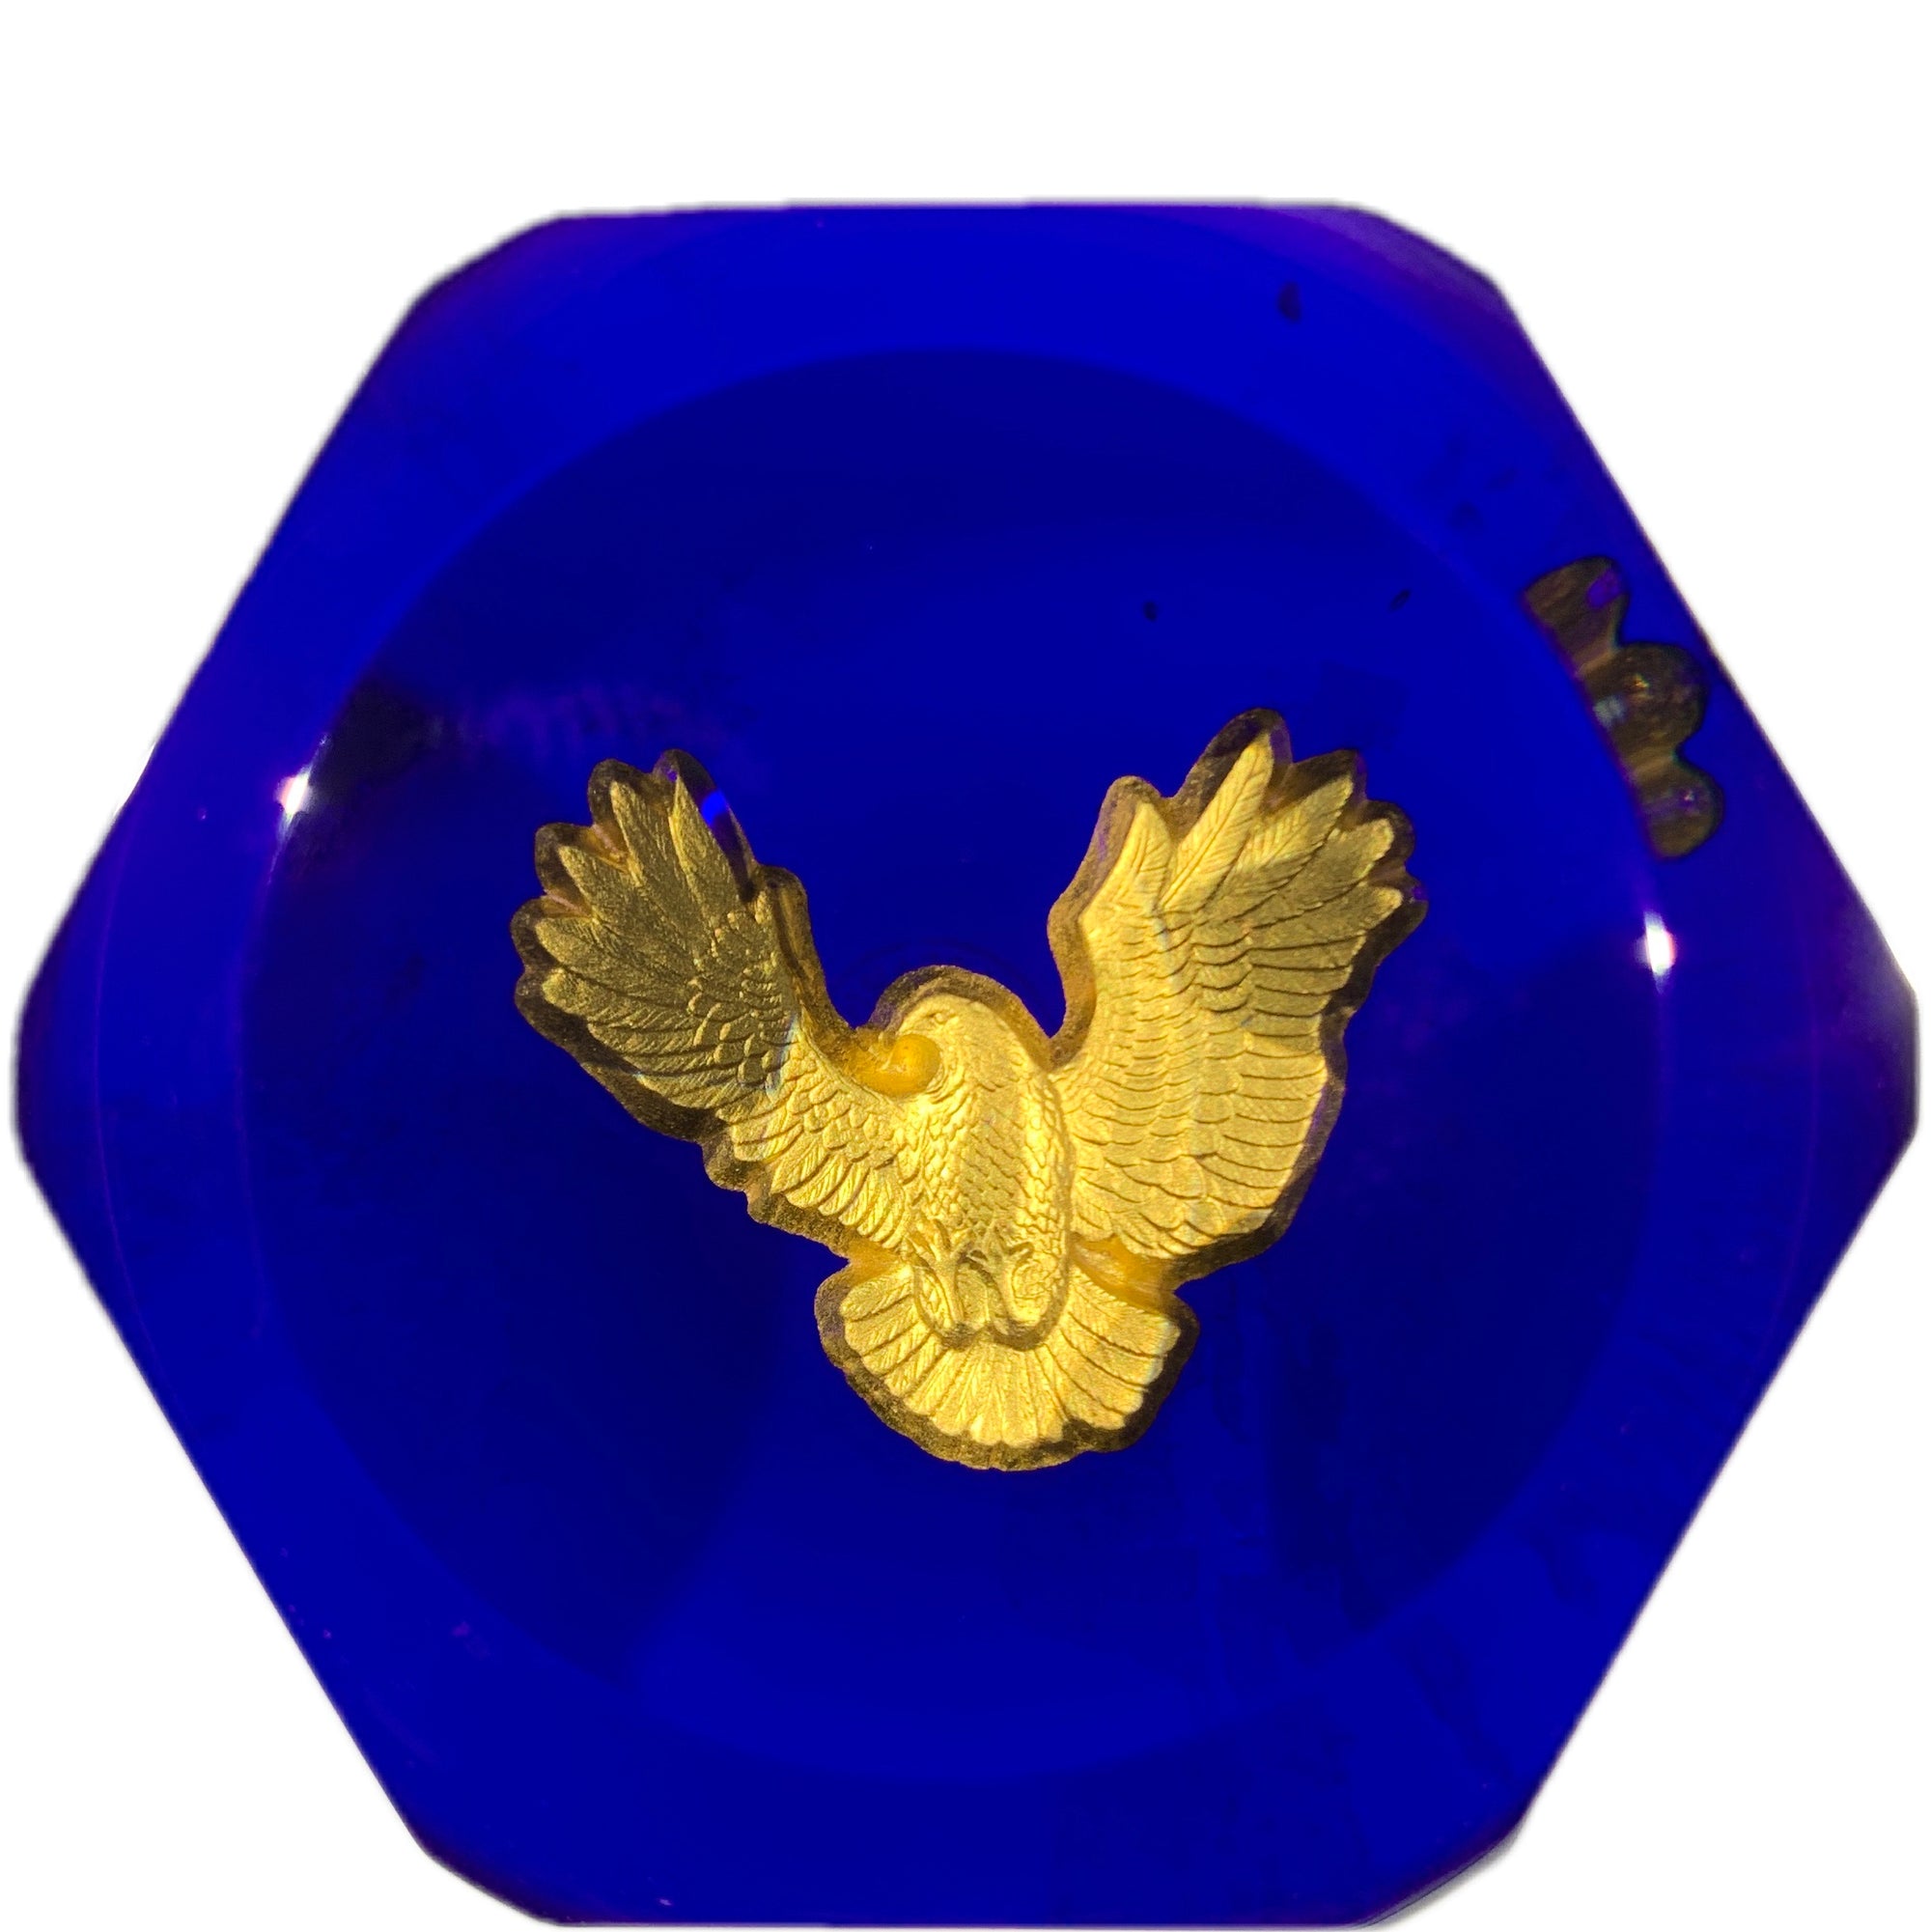 Vintage Baccarat "American Express" Gold Eagle Inclusion Art Glass Paperweight